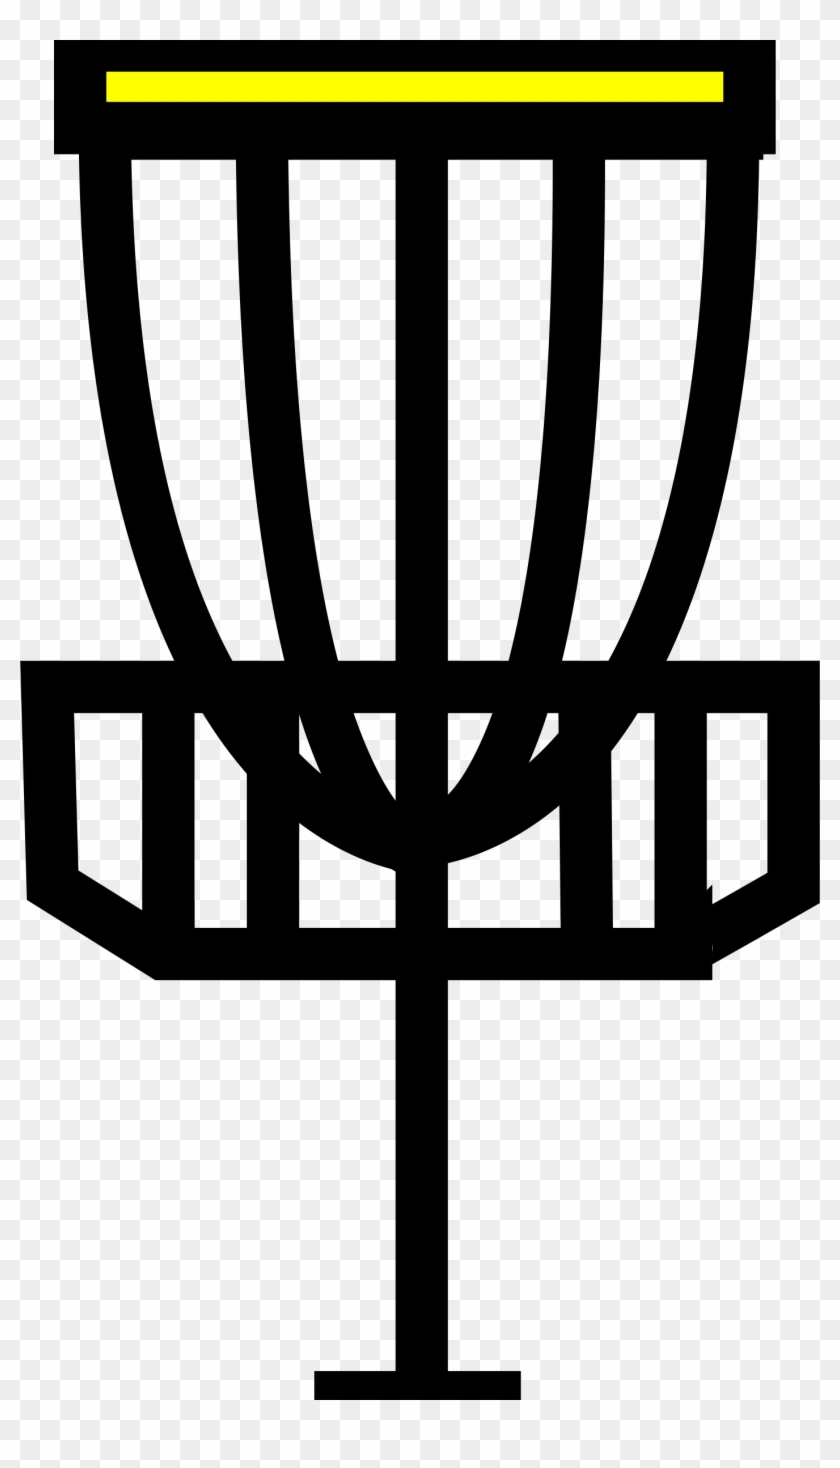 This Free Icons Png Design Of Disc Golf Goal - Disc Golf Clip Art #1008648